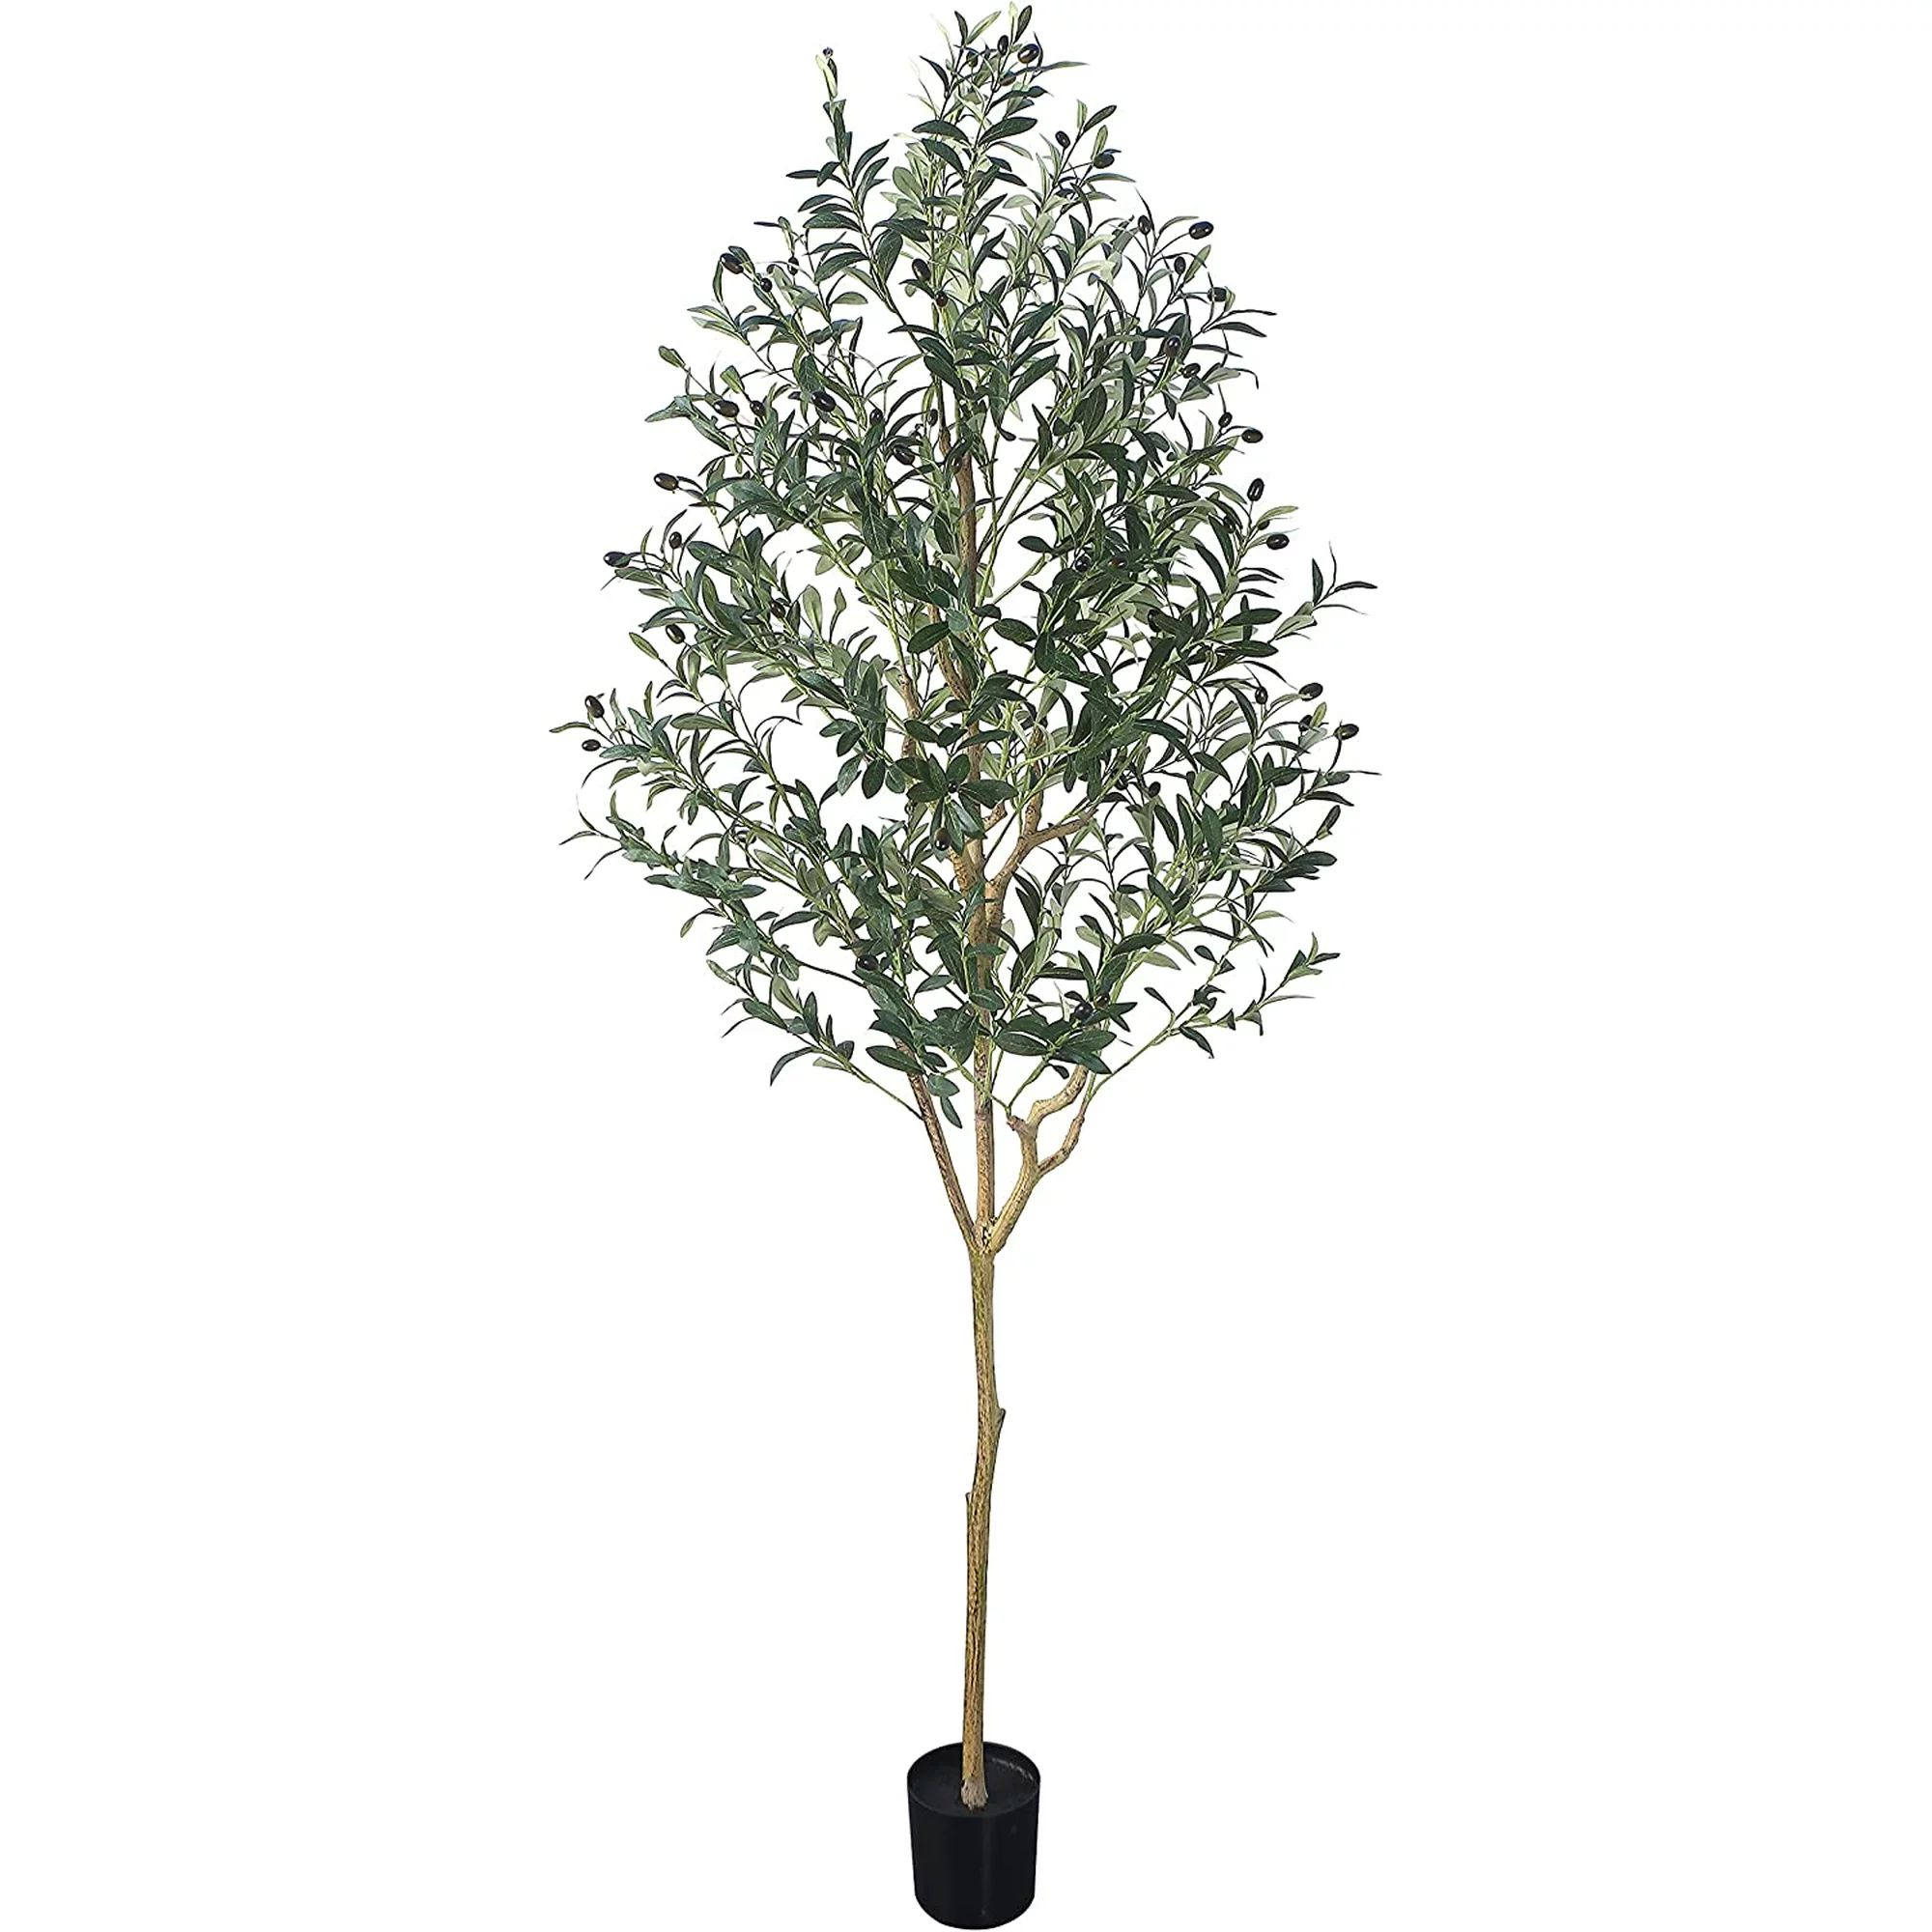 Coolmade Artificial Olive Tree 5FT Tall Faux Silk Plant for Home Office Decor Indoor Fake Potted ... | Walmart (US)